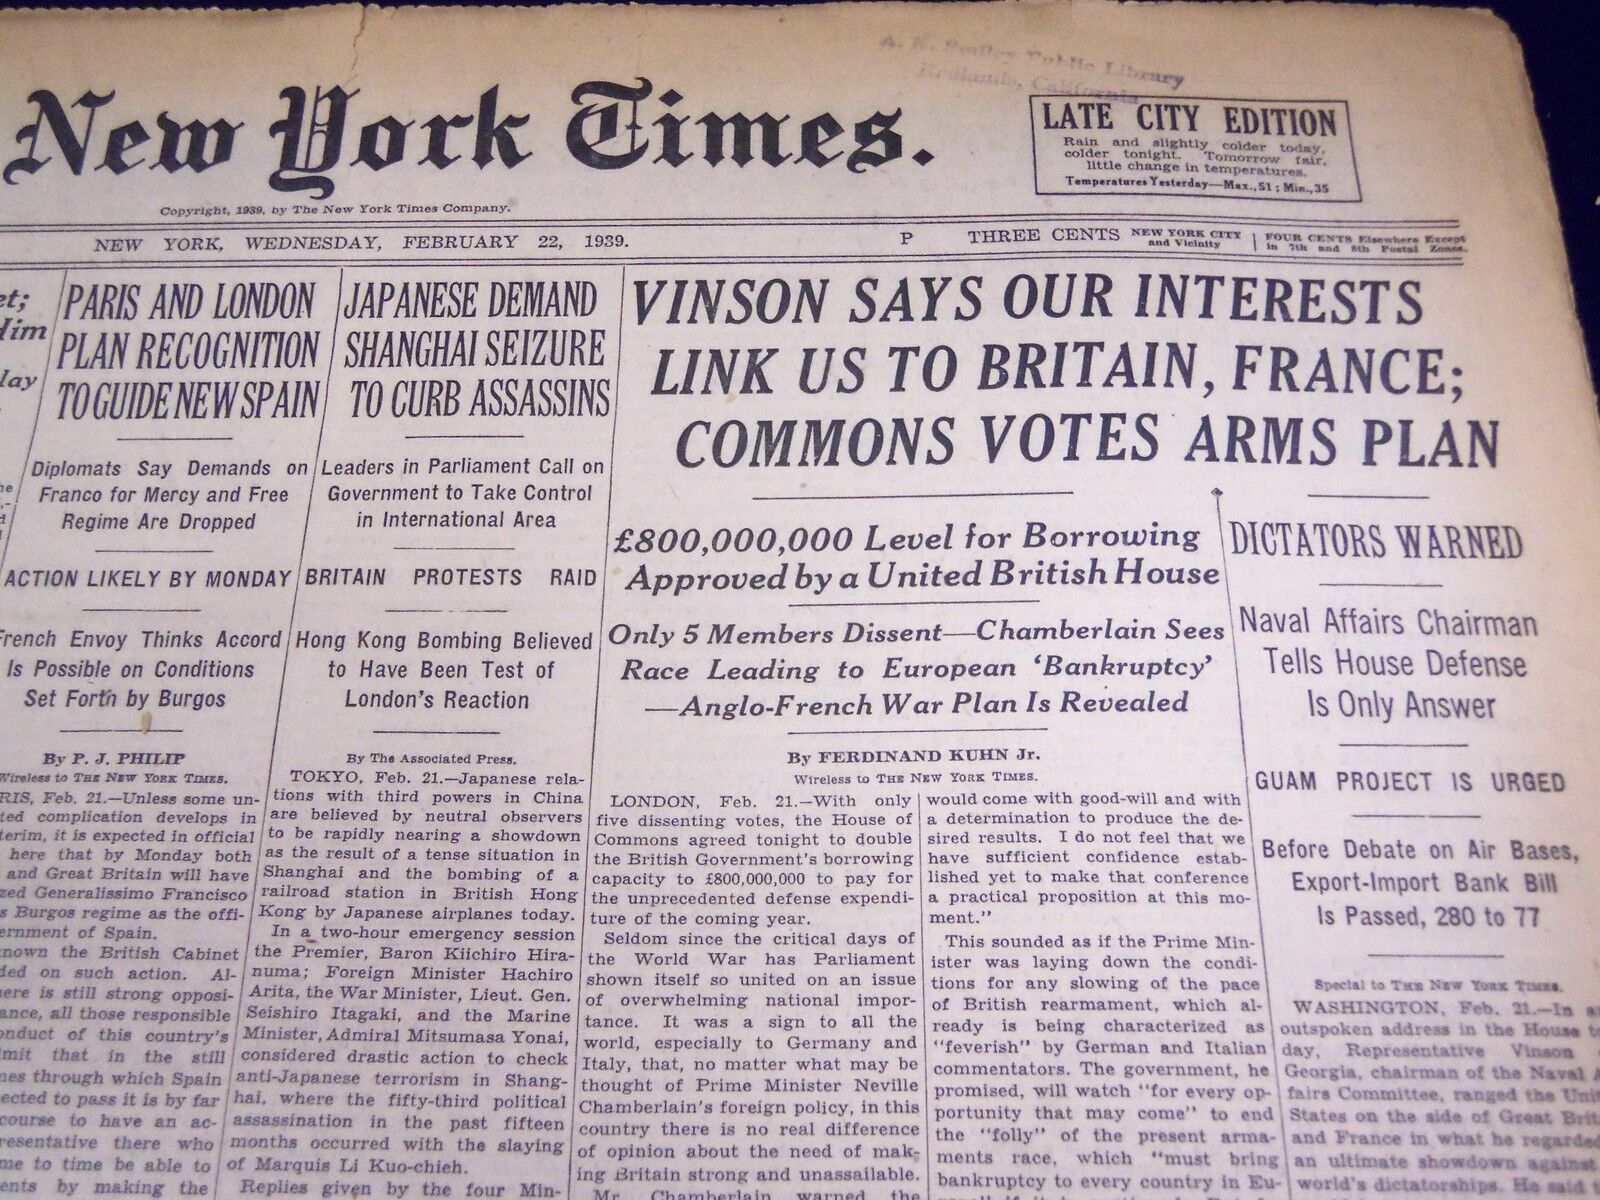 1939 FEB 22 NEW YORK TIMES VINSON SAYS OUR INTERESTS LINK US TO BRITAIN - NT 583